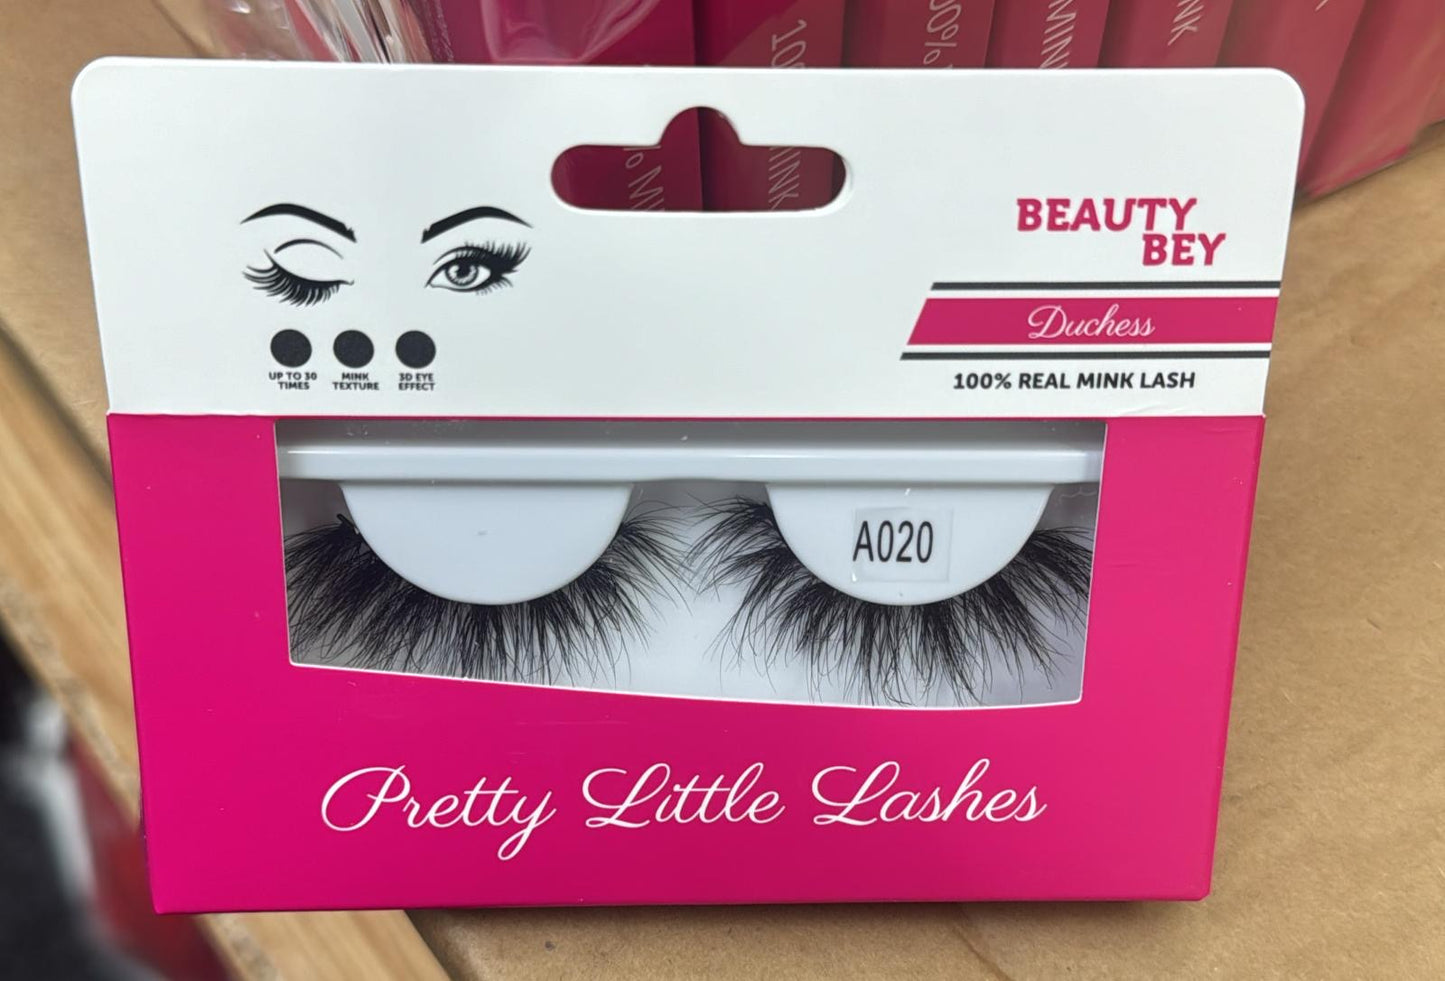 BEAUTY BEY - DUCHESS - 100% REAL MINK LASHES